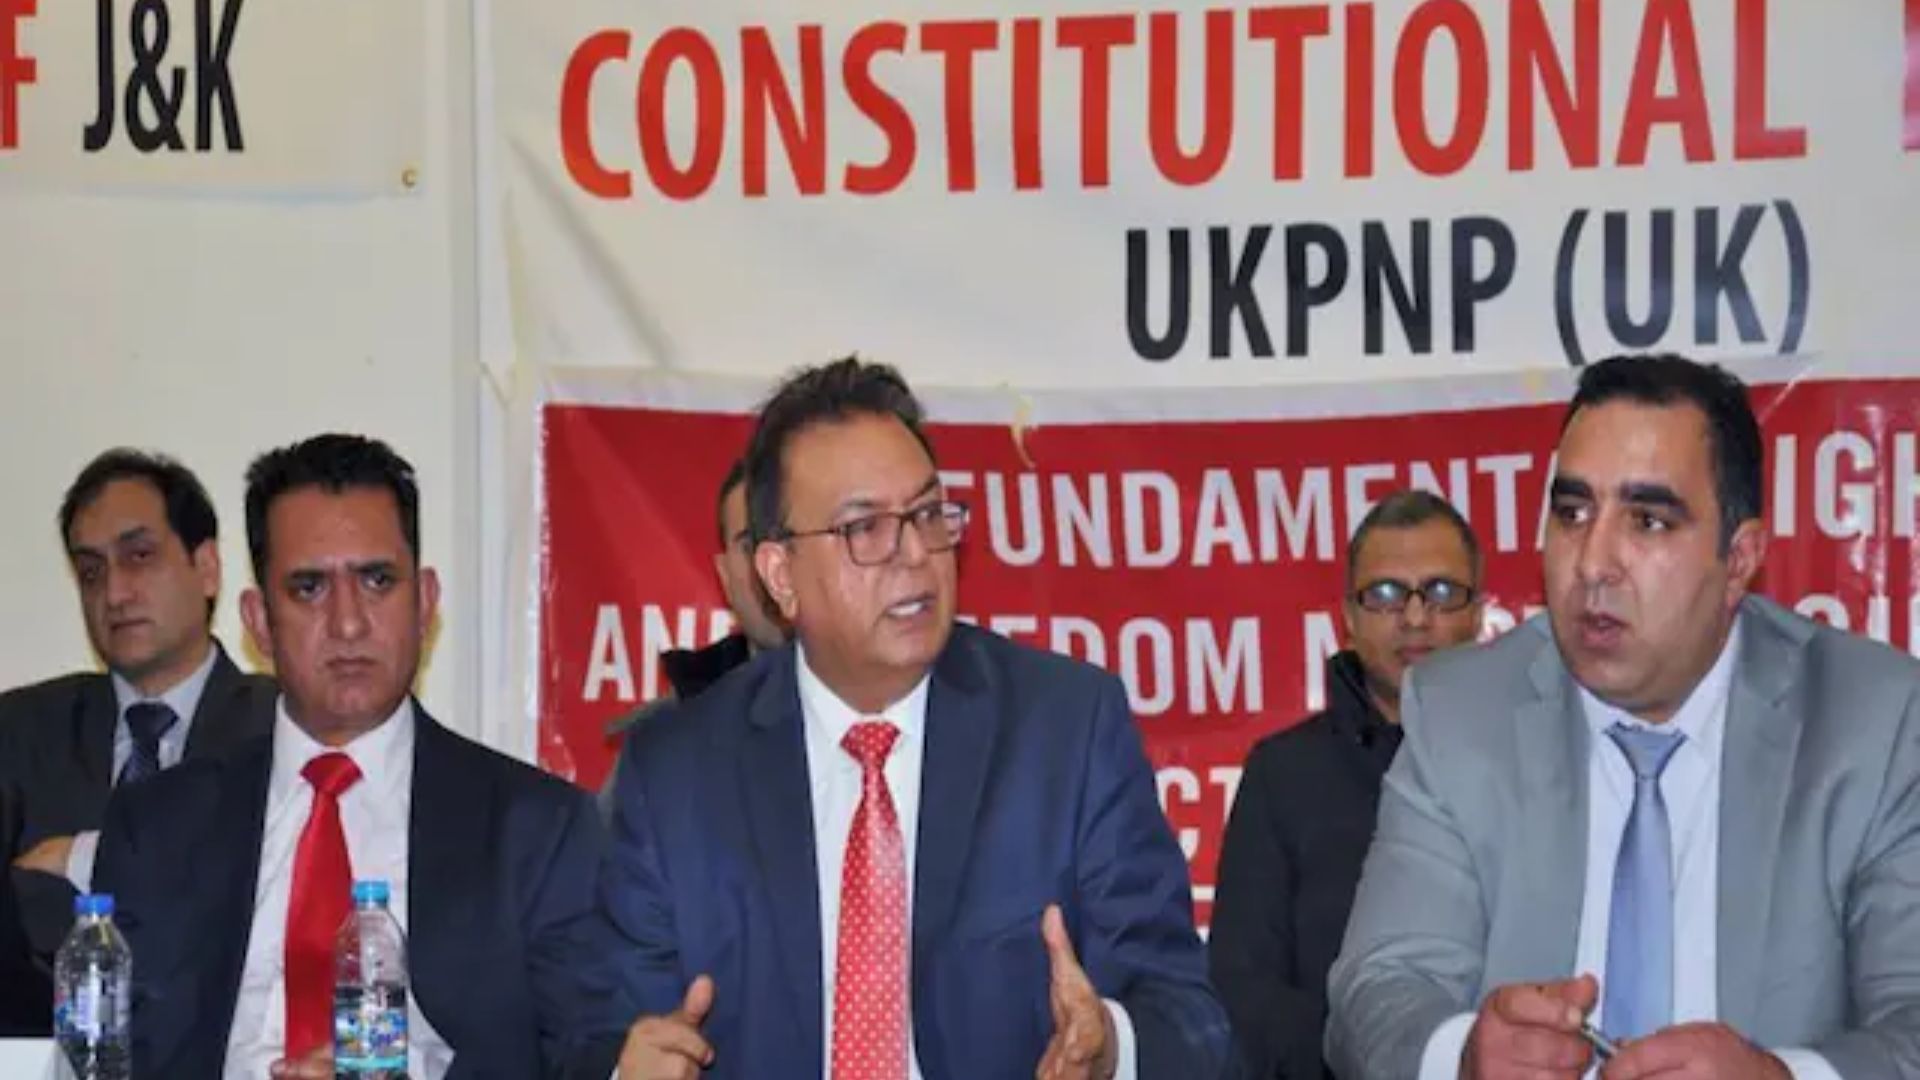 UKPNP Expresses Grave Concern About Dire Human Rights Situation In Pok At UN